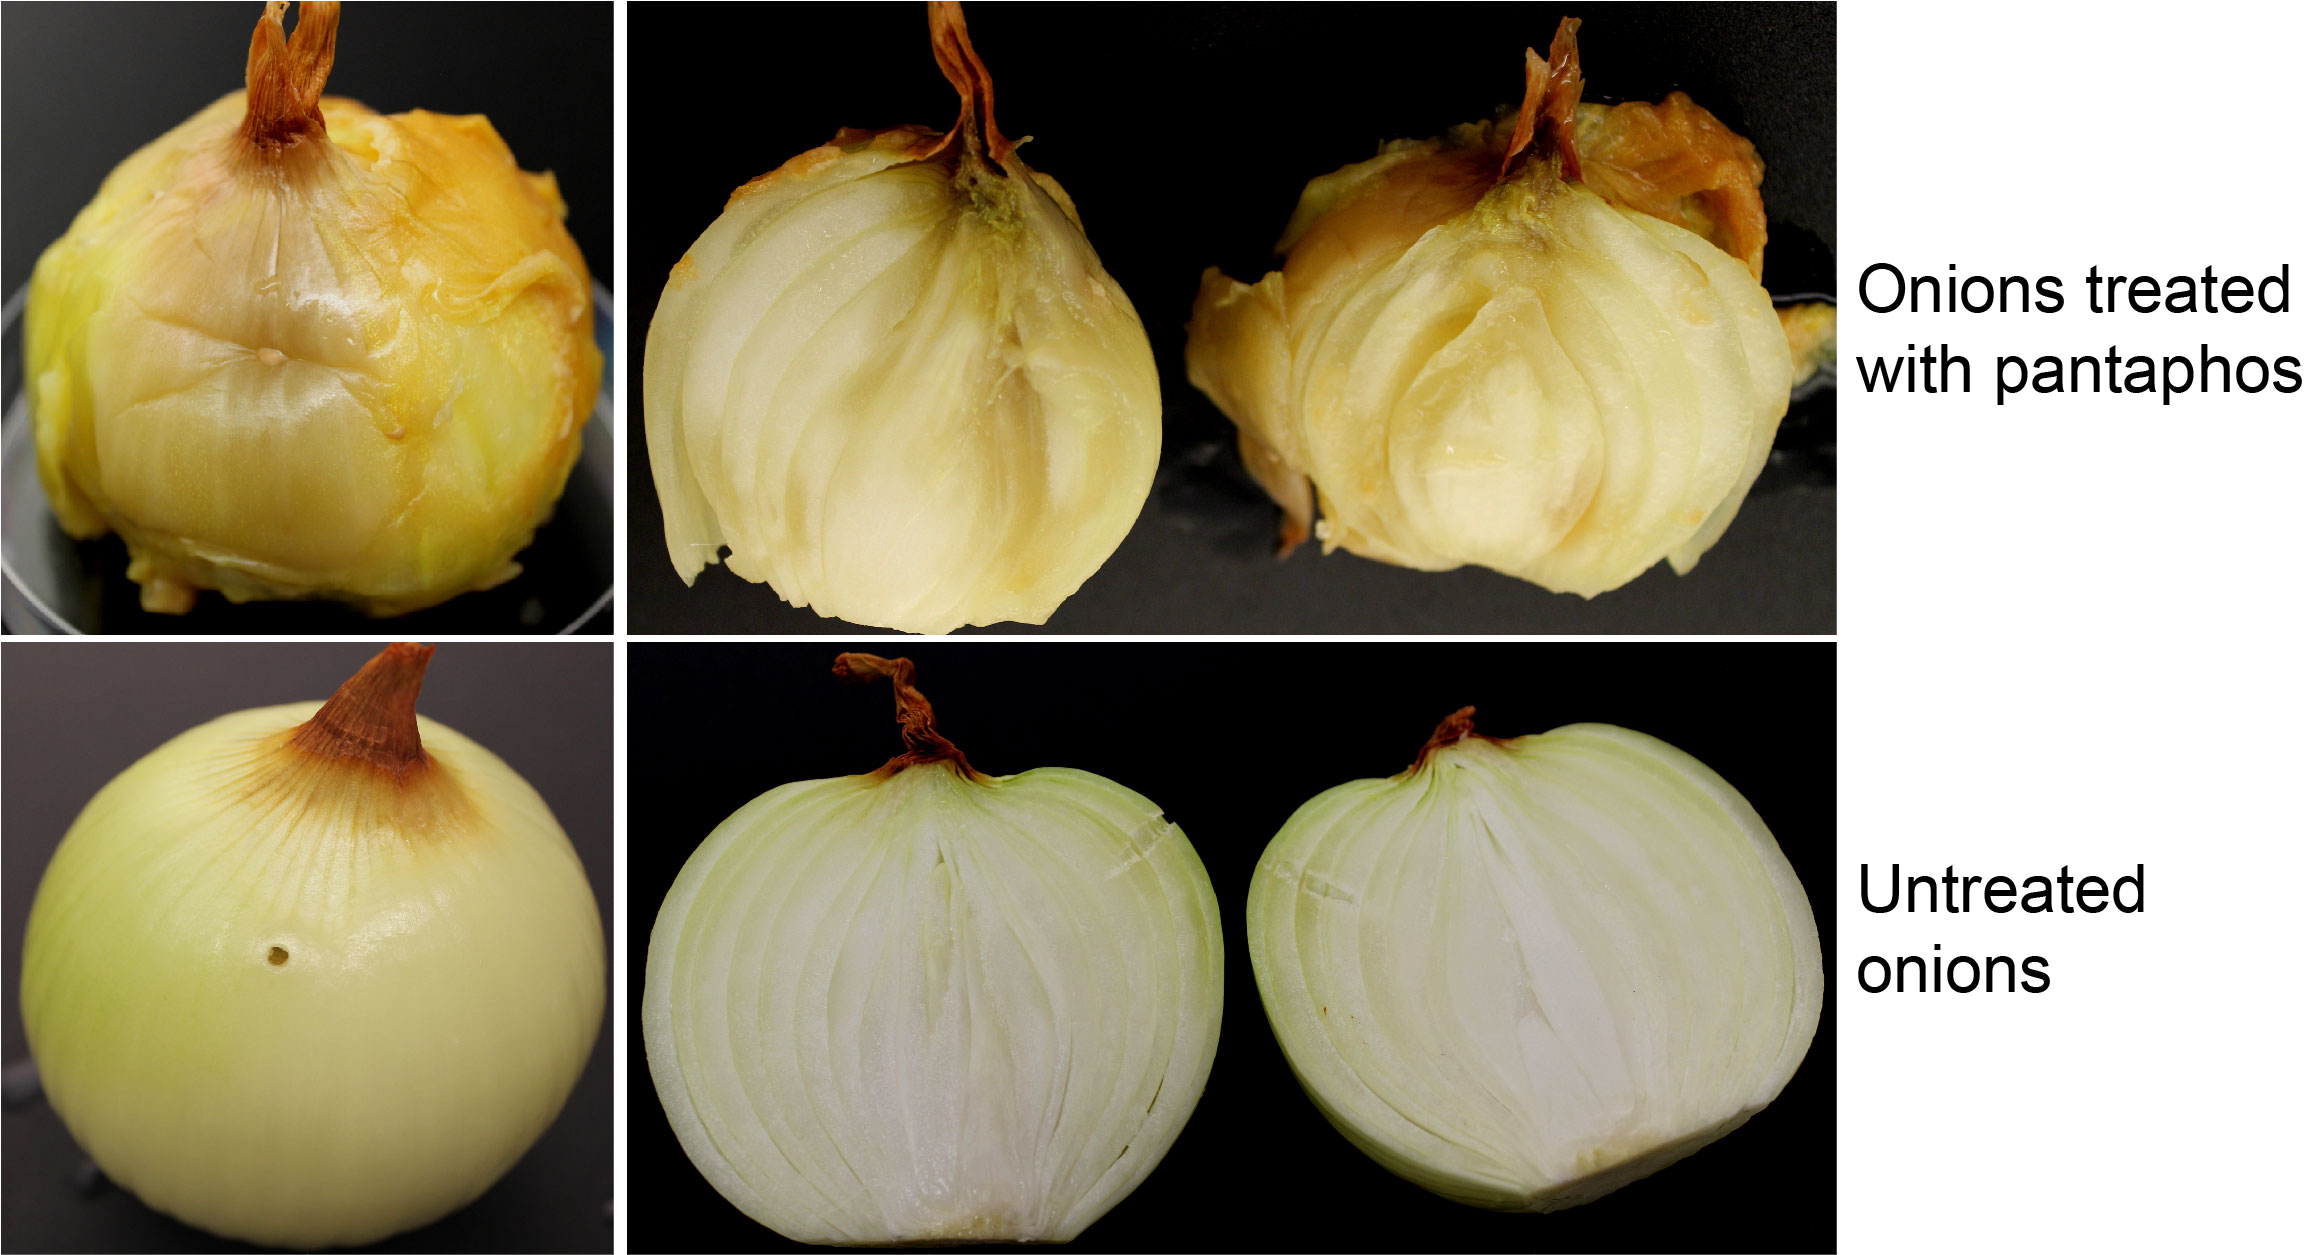 Pantaphos, which is produced by the plant pathogen Pantoea ananatis, is responsible for causing onion center rot.